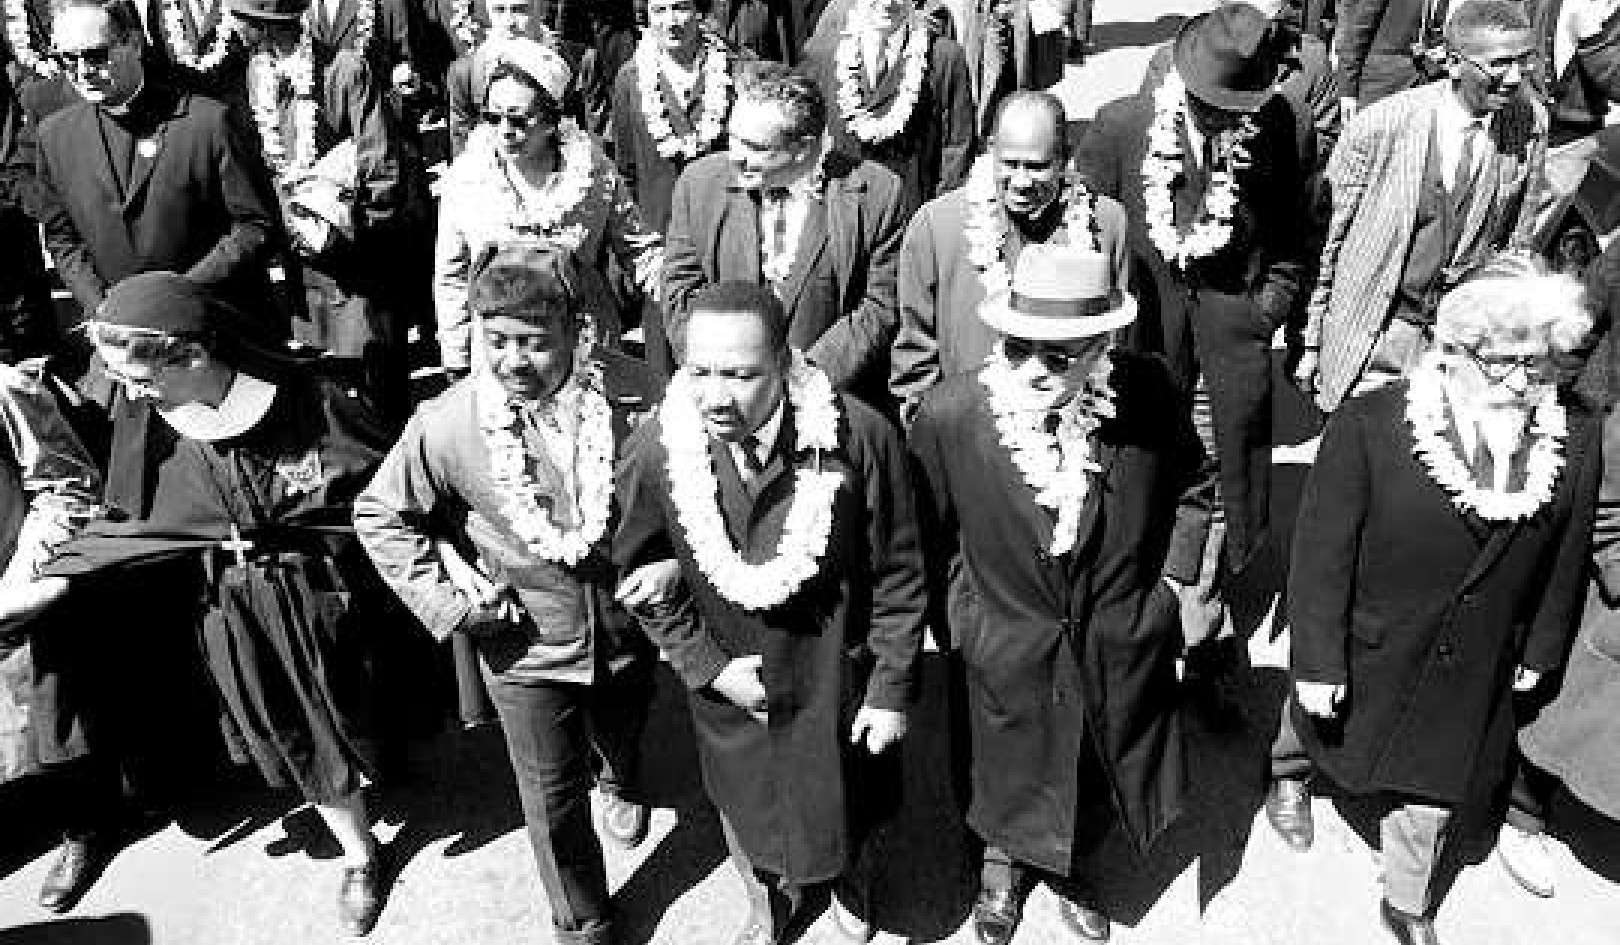 MLK’s Vision of Social Justice Included a House of Many Faiths